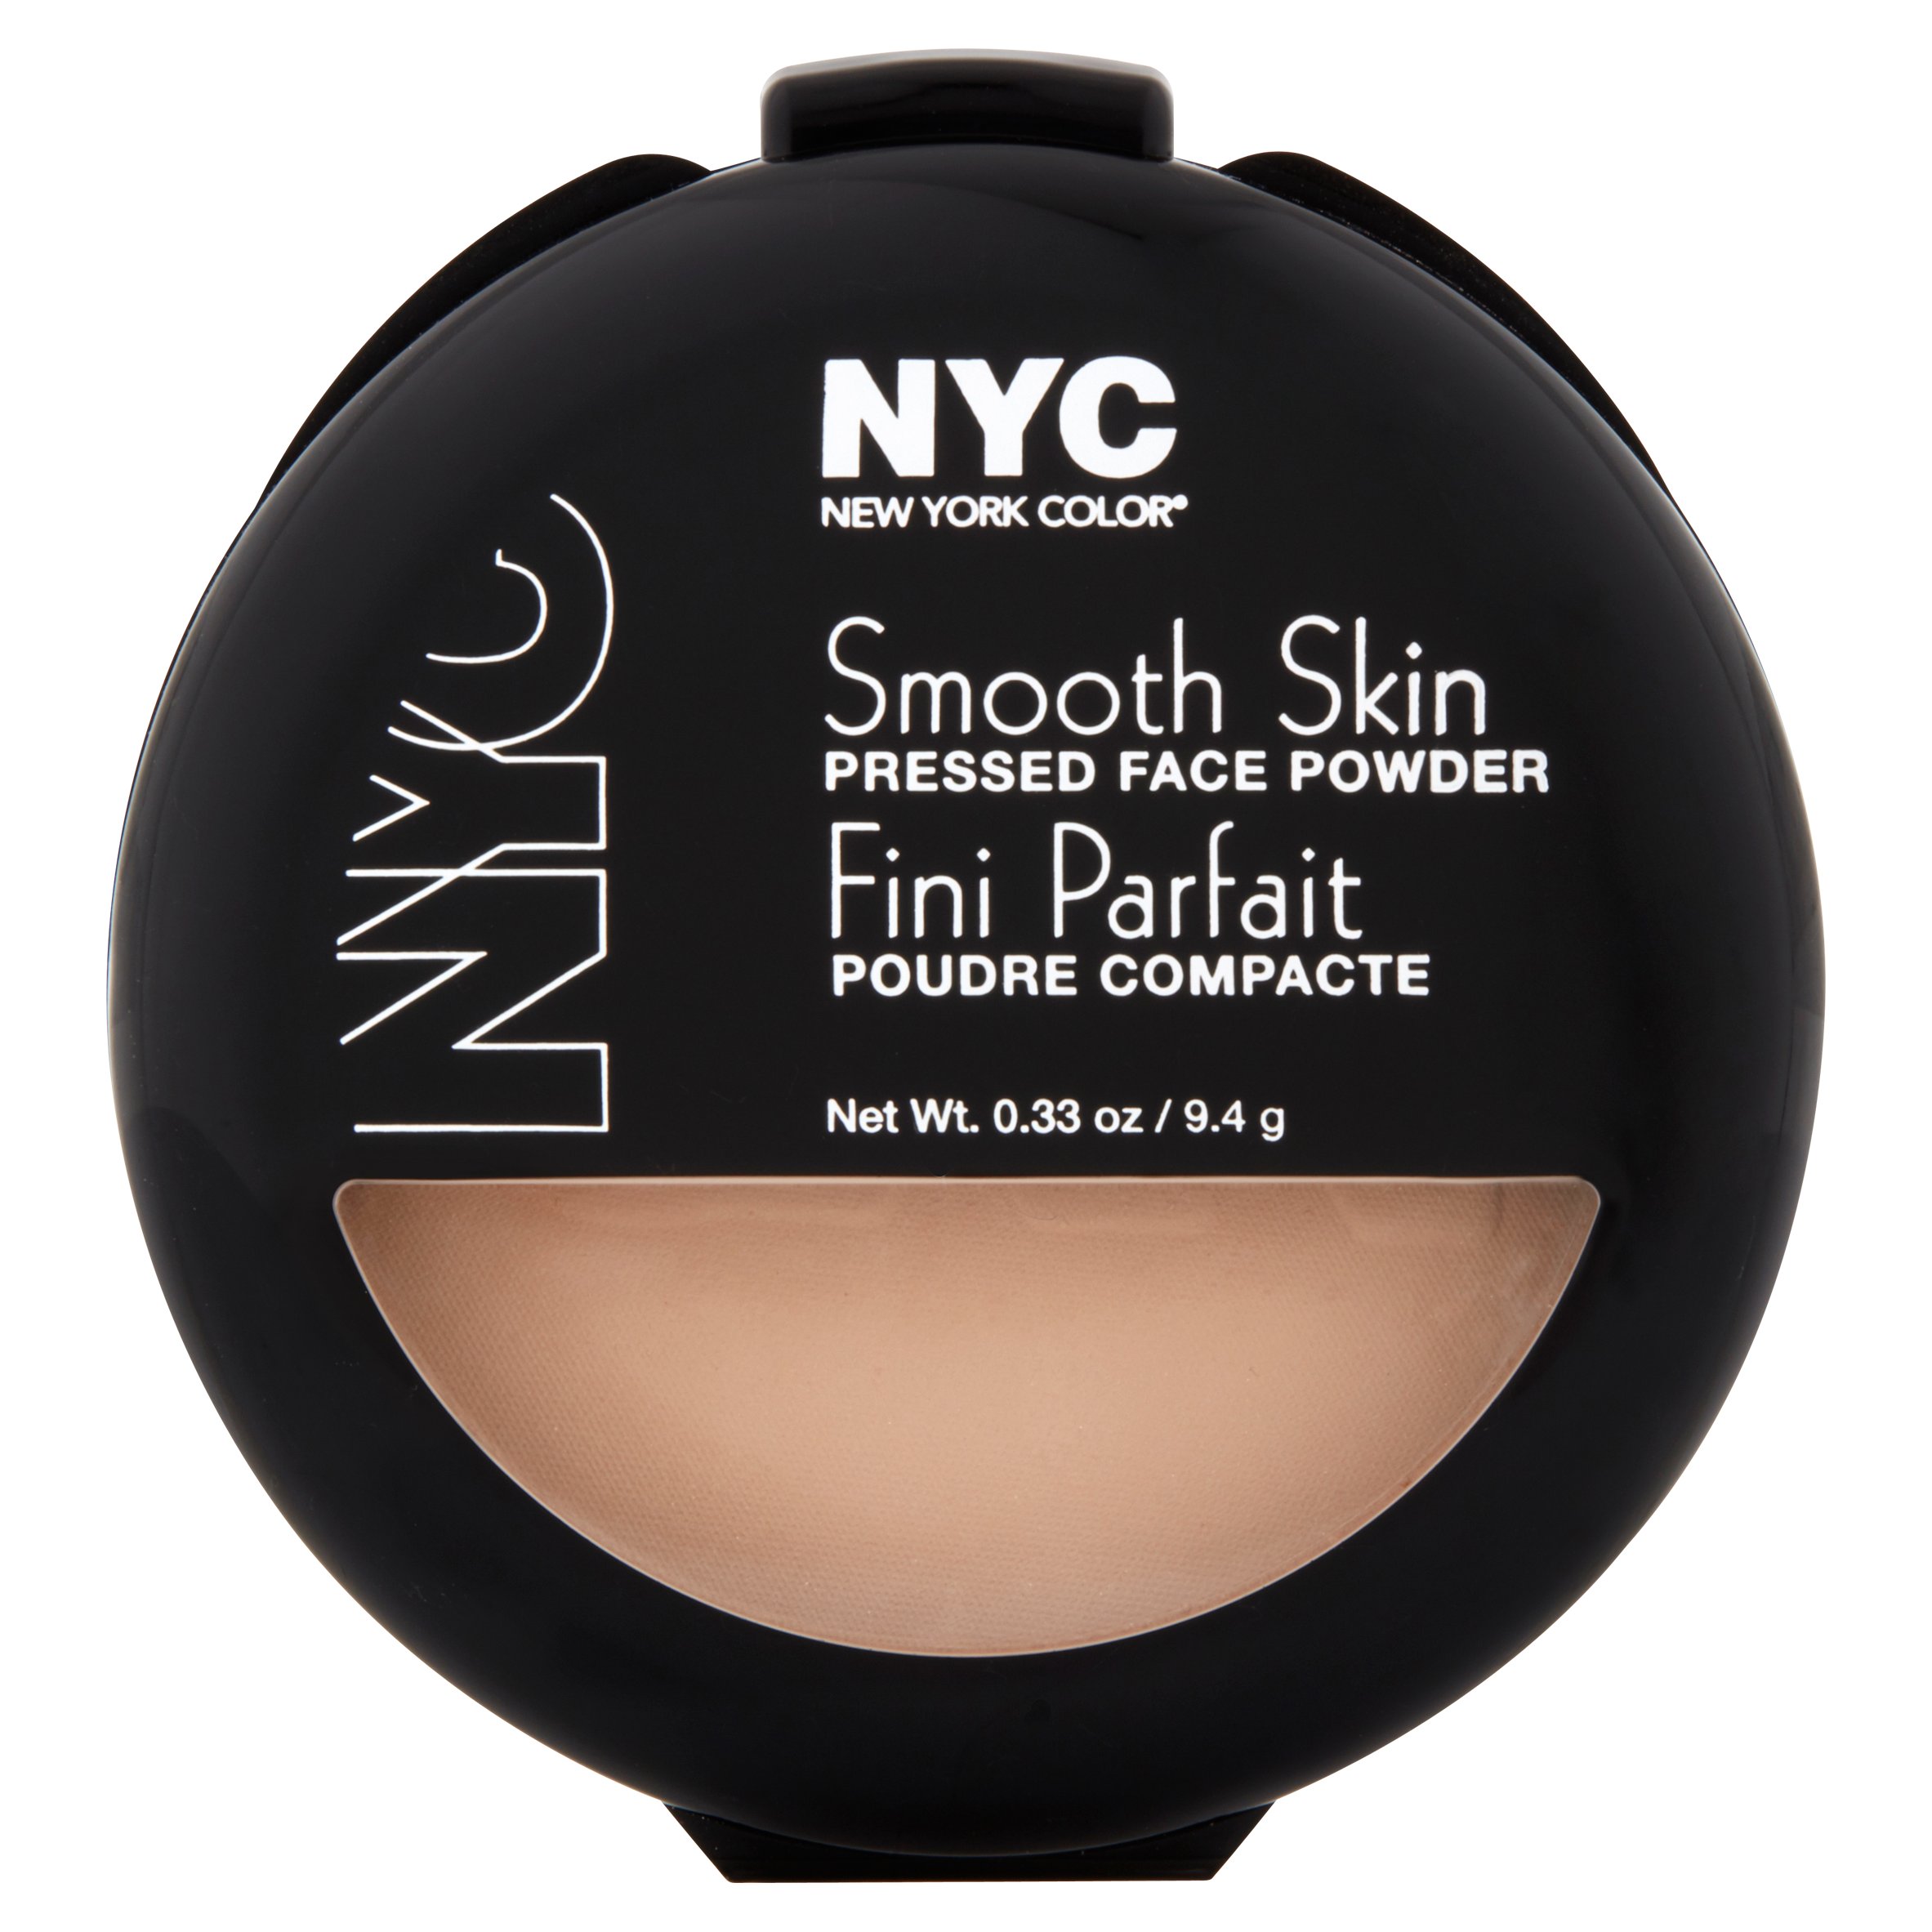 New york color smooth skin 704a warm beige pressed face powder, 0.33 oz - image 1 of 4